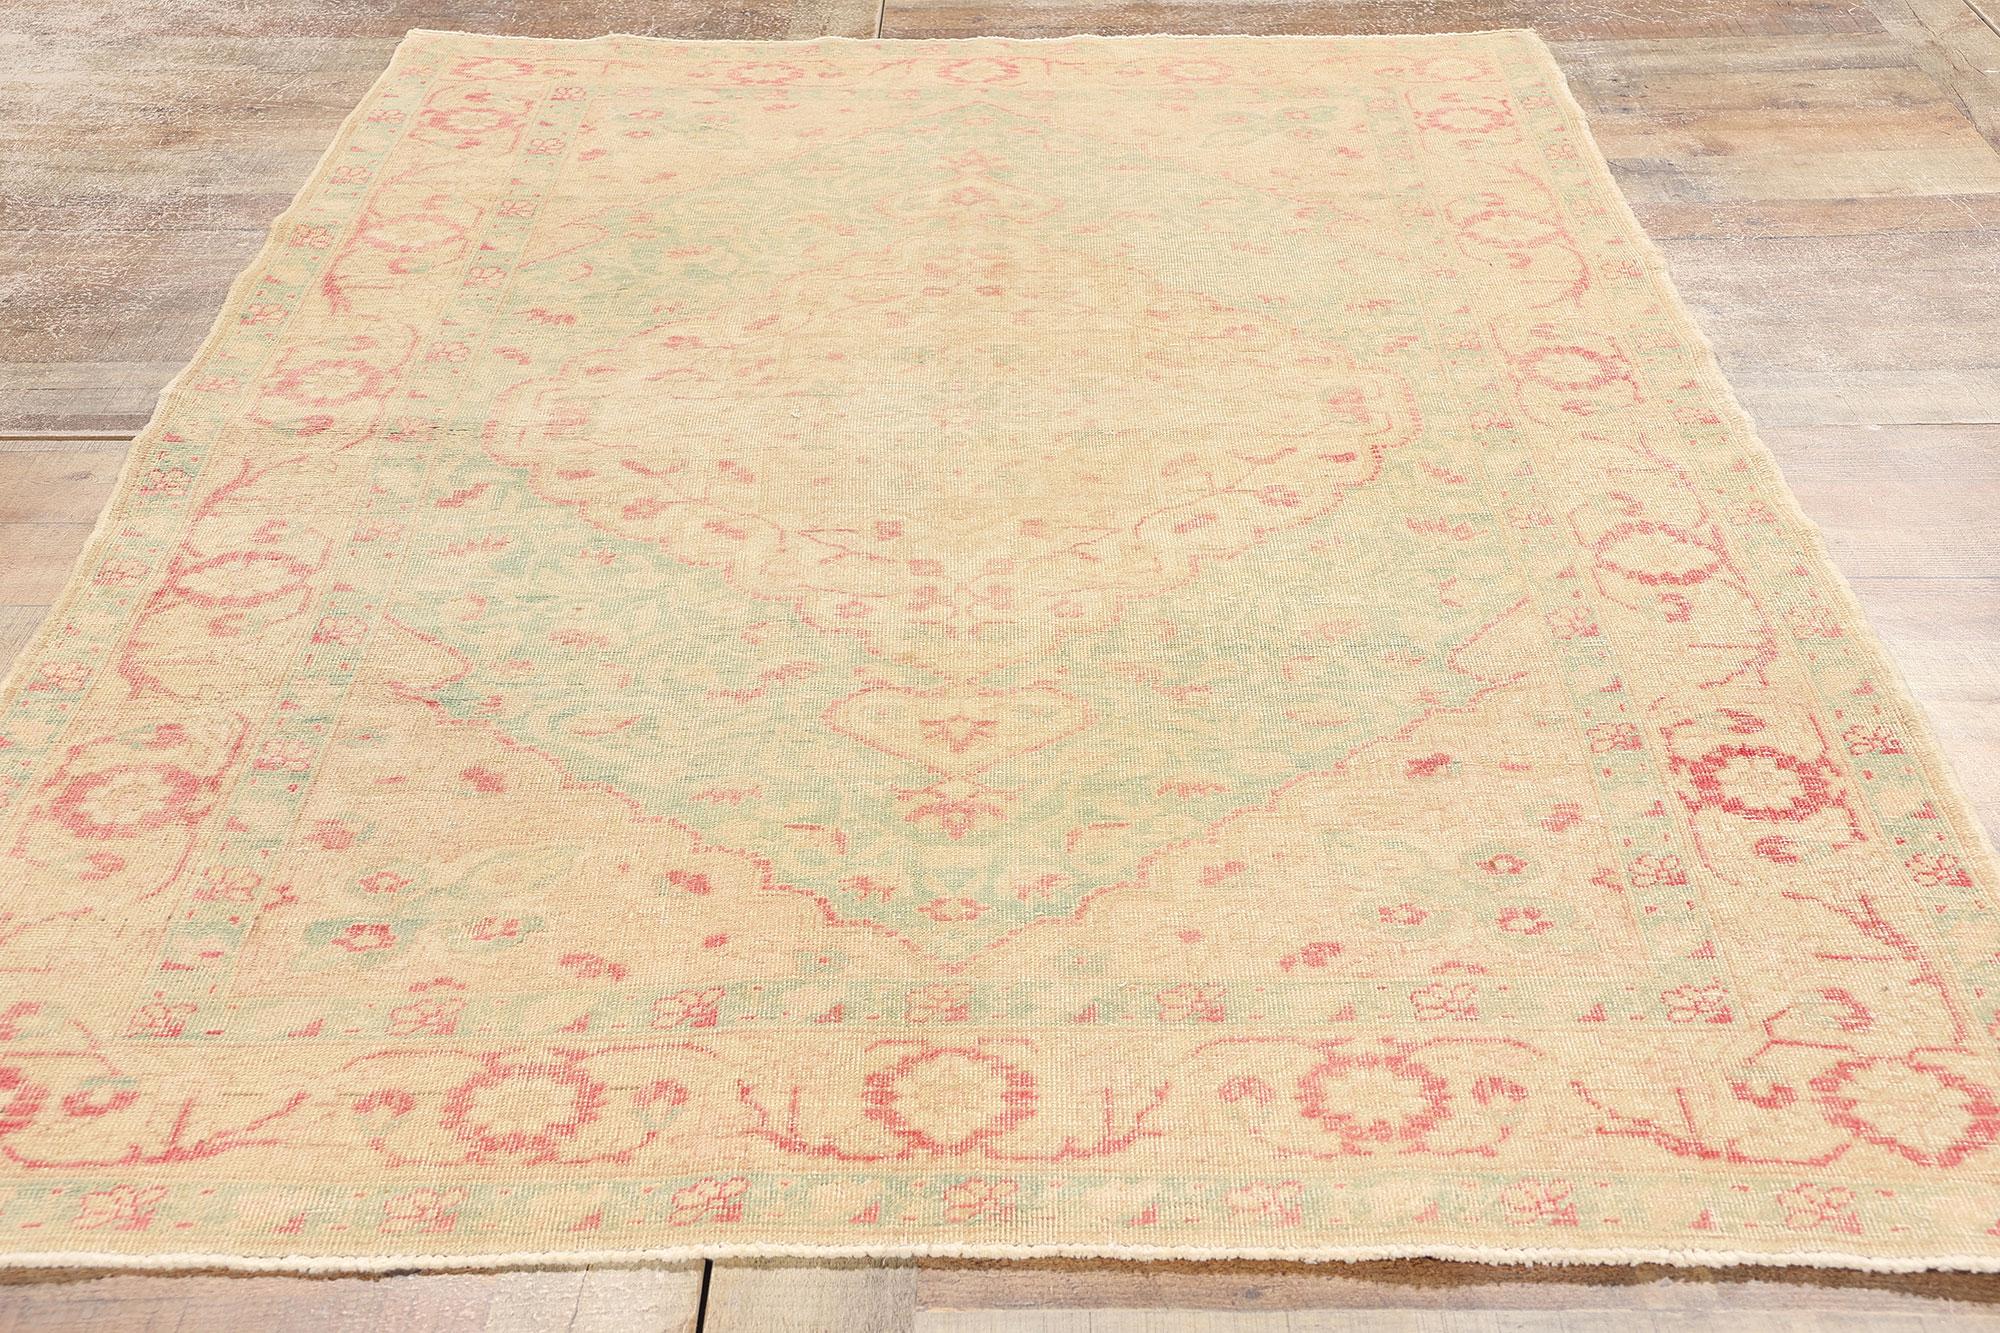 Vintage Turkish Sivas Rug with Soft Earth-Tone Colors For Sale 1